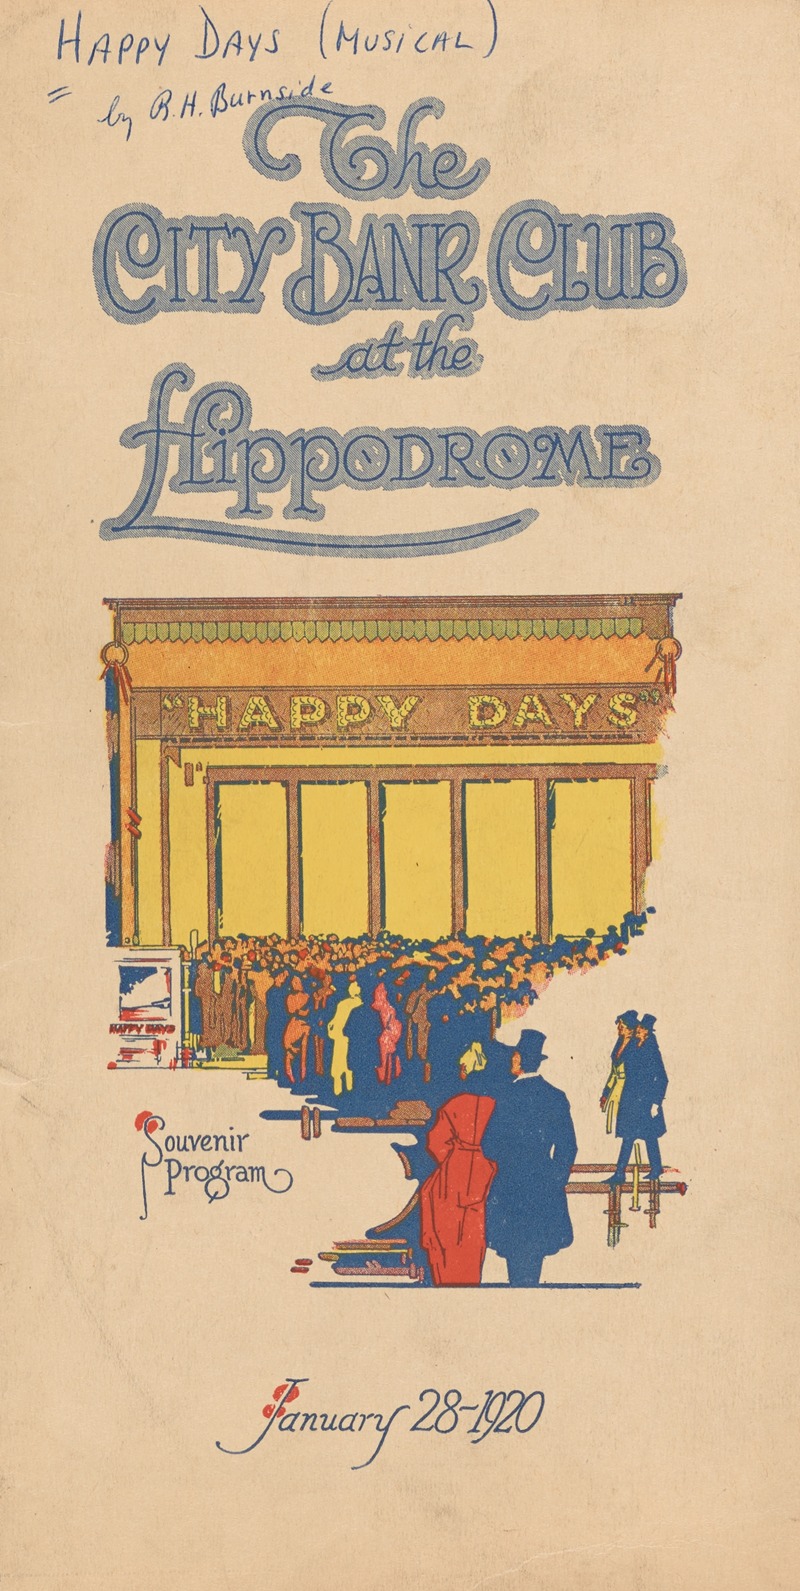 Anonymous - The City Bank Club at the Hippodrome souvenir program for Happy Days